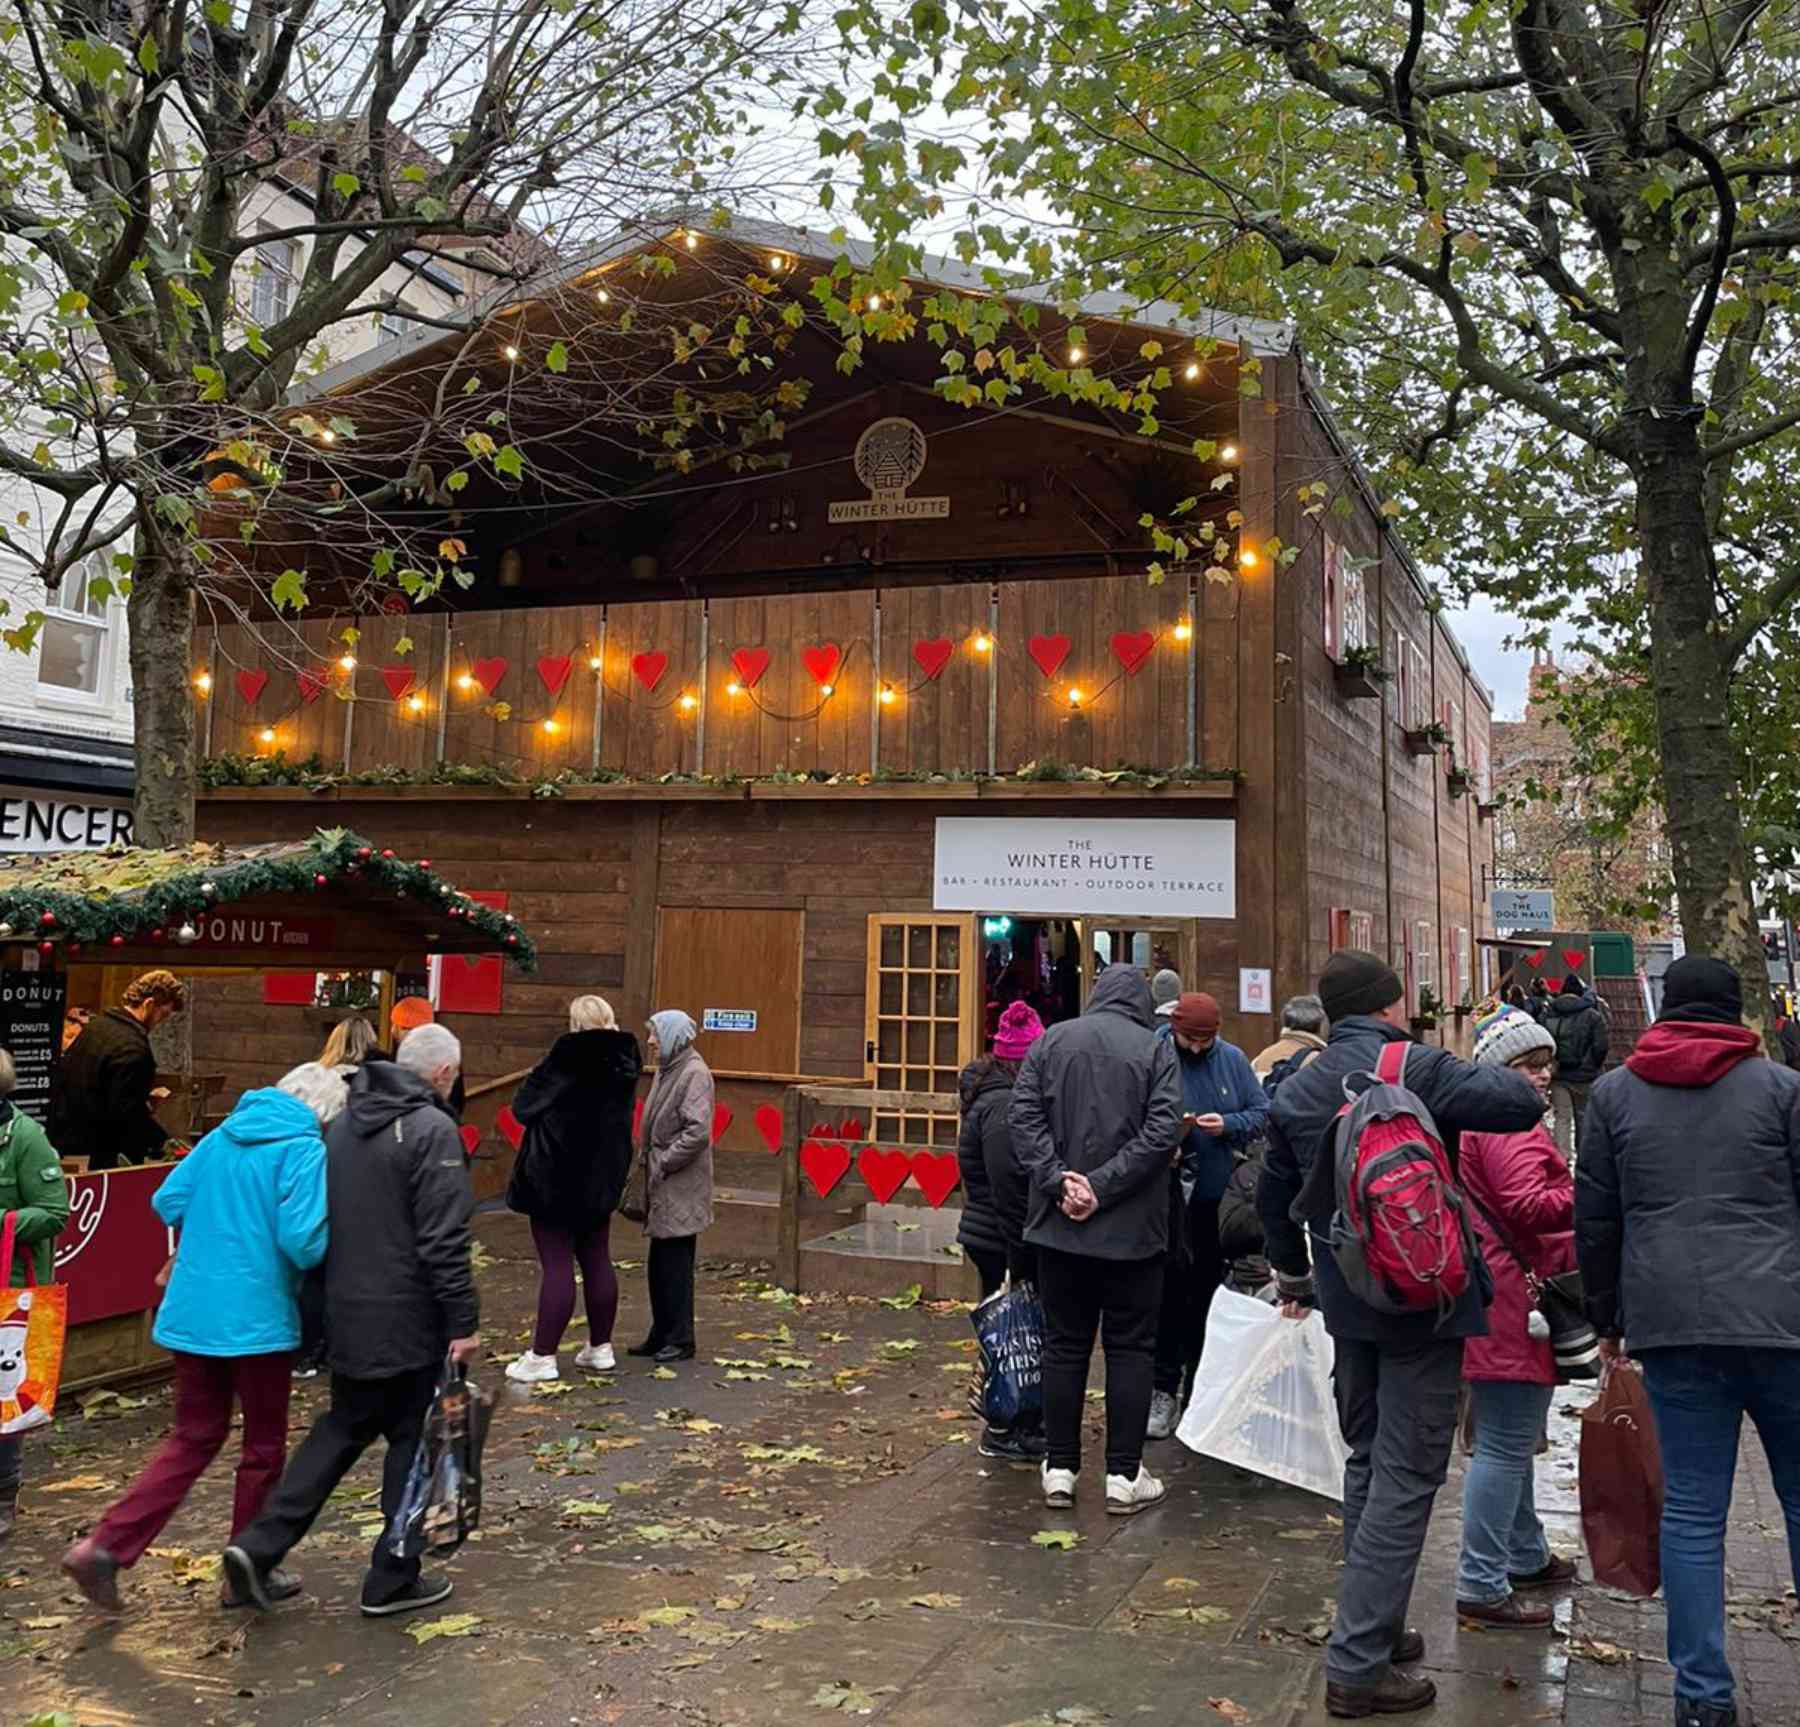 SWISS CHALET POP-UP BAR & RESTAURANT OPENS AT YORK CHRISTMAS MARKET TO FANFARE FROM ALPINE HORN AND CAPACITY VISITORS [21 NOVEMBER 2022, YORK]: York’s newest Christmas attraction opened on Friday to a fanfare with a difference – from a traditional alpine horn. The Winter Hütte Swiss-style bar and restaurant brings a true taste of the Alps to York’s Christmas Market and during its opening weekend entertained thousands of residents and tourists who came to enjoy the new ski lodge ambience, with capacity visitors in the bar and over 800 people served in the upstairs restaurant. The two-storey Winter Hütte is a traditional wooden chalet built around a marquee structure, complete with mountain views, red shutters, window boxes, and even rustic cow bells. The pop-up venue comprises a fully-licensed bar area downstairs serving seasonal favourites such as gluhwein and hot chocolate, as well as a special Alpine Star beer from Brew York and a range of cocktails and wines. A gourmet sausage stall The Dog Haus caters for bar patrons as well as passers-by outside. With its Alpine folk motif curtains, vintage ski posters and sheepskin-covered wooden stools, The Winter Hütte’s apres-ski bar evokes a cosy mountain refuge, with a large stone fireplace and woodburning stove, and window views of snowy village scenes. With live music performances and the scent of gluhwein and bratwurst, The Winter Hütte offers an experience for all the senses this Christmas. Upstairs The Star Inn at The Winter Hütte brings a relaxed bistro-style restaurant and Swiss-with-a-twist food from one of Yorkshire’s Best-known chefs, the Michelin-starred Andrew Pern, while the outdoor terrace makes a picturesque setting for a festive drink overlooking the Christmas Market. With a broad menu including traditional favourites such as fondue and tartiflette as well as off-piste specials such as pheasant with smoked garlic and a ‘Mont Blanc’ dessert, the ambience is completed by antler chandeliers and stunning black and white vintage photographs from the Swiss village of Zermatt, creating an authentic and cosy dining experience, with table-sharing in true apres-ski style. Booking is recommended for the restaurant as well as the outdoor drinks terrace at www.winterhutte.co.uk. A deposit of £15 per person is required for the booking and will be fully redeemable against the final bill. For full terms and conditions, please visit the website. The Winter Hütte is open every day from 17th November 2022 until 1st January 2023, from 9.30am until 11pm (closed on Christmas Day). For any general enquiries, please visit the website or email the team at CanIAlpYou@winterhutte.co.uk. The Winter Hütte is part of St Nicholas Fair, York’s Christmas Market, in collaboration with Make It York. The Winter Hütte is a joint venture between Coopers Marquees, CMJ Events and The Star Inn the City (York). Combined, the team brings over 60 years of live entertainment and food knowledge to deliver this spectacular new event for York, home to all three companies.